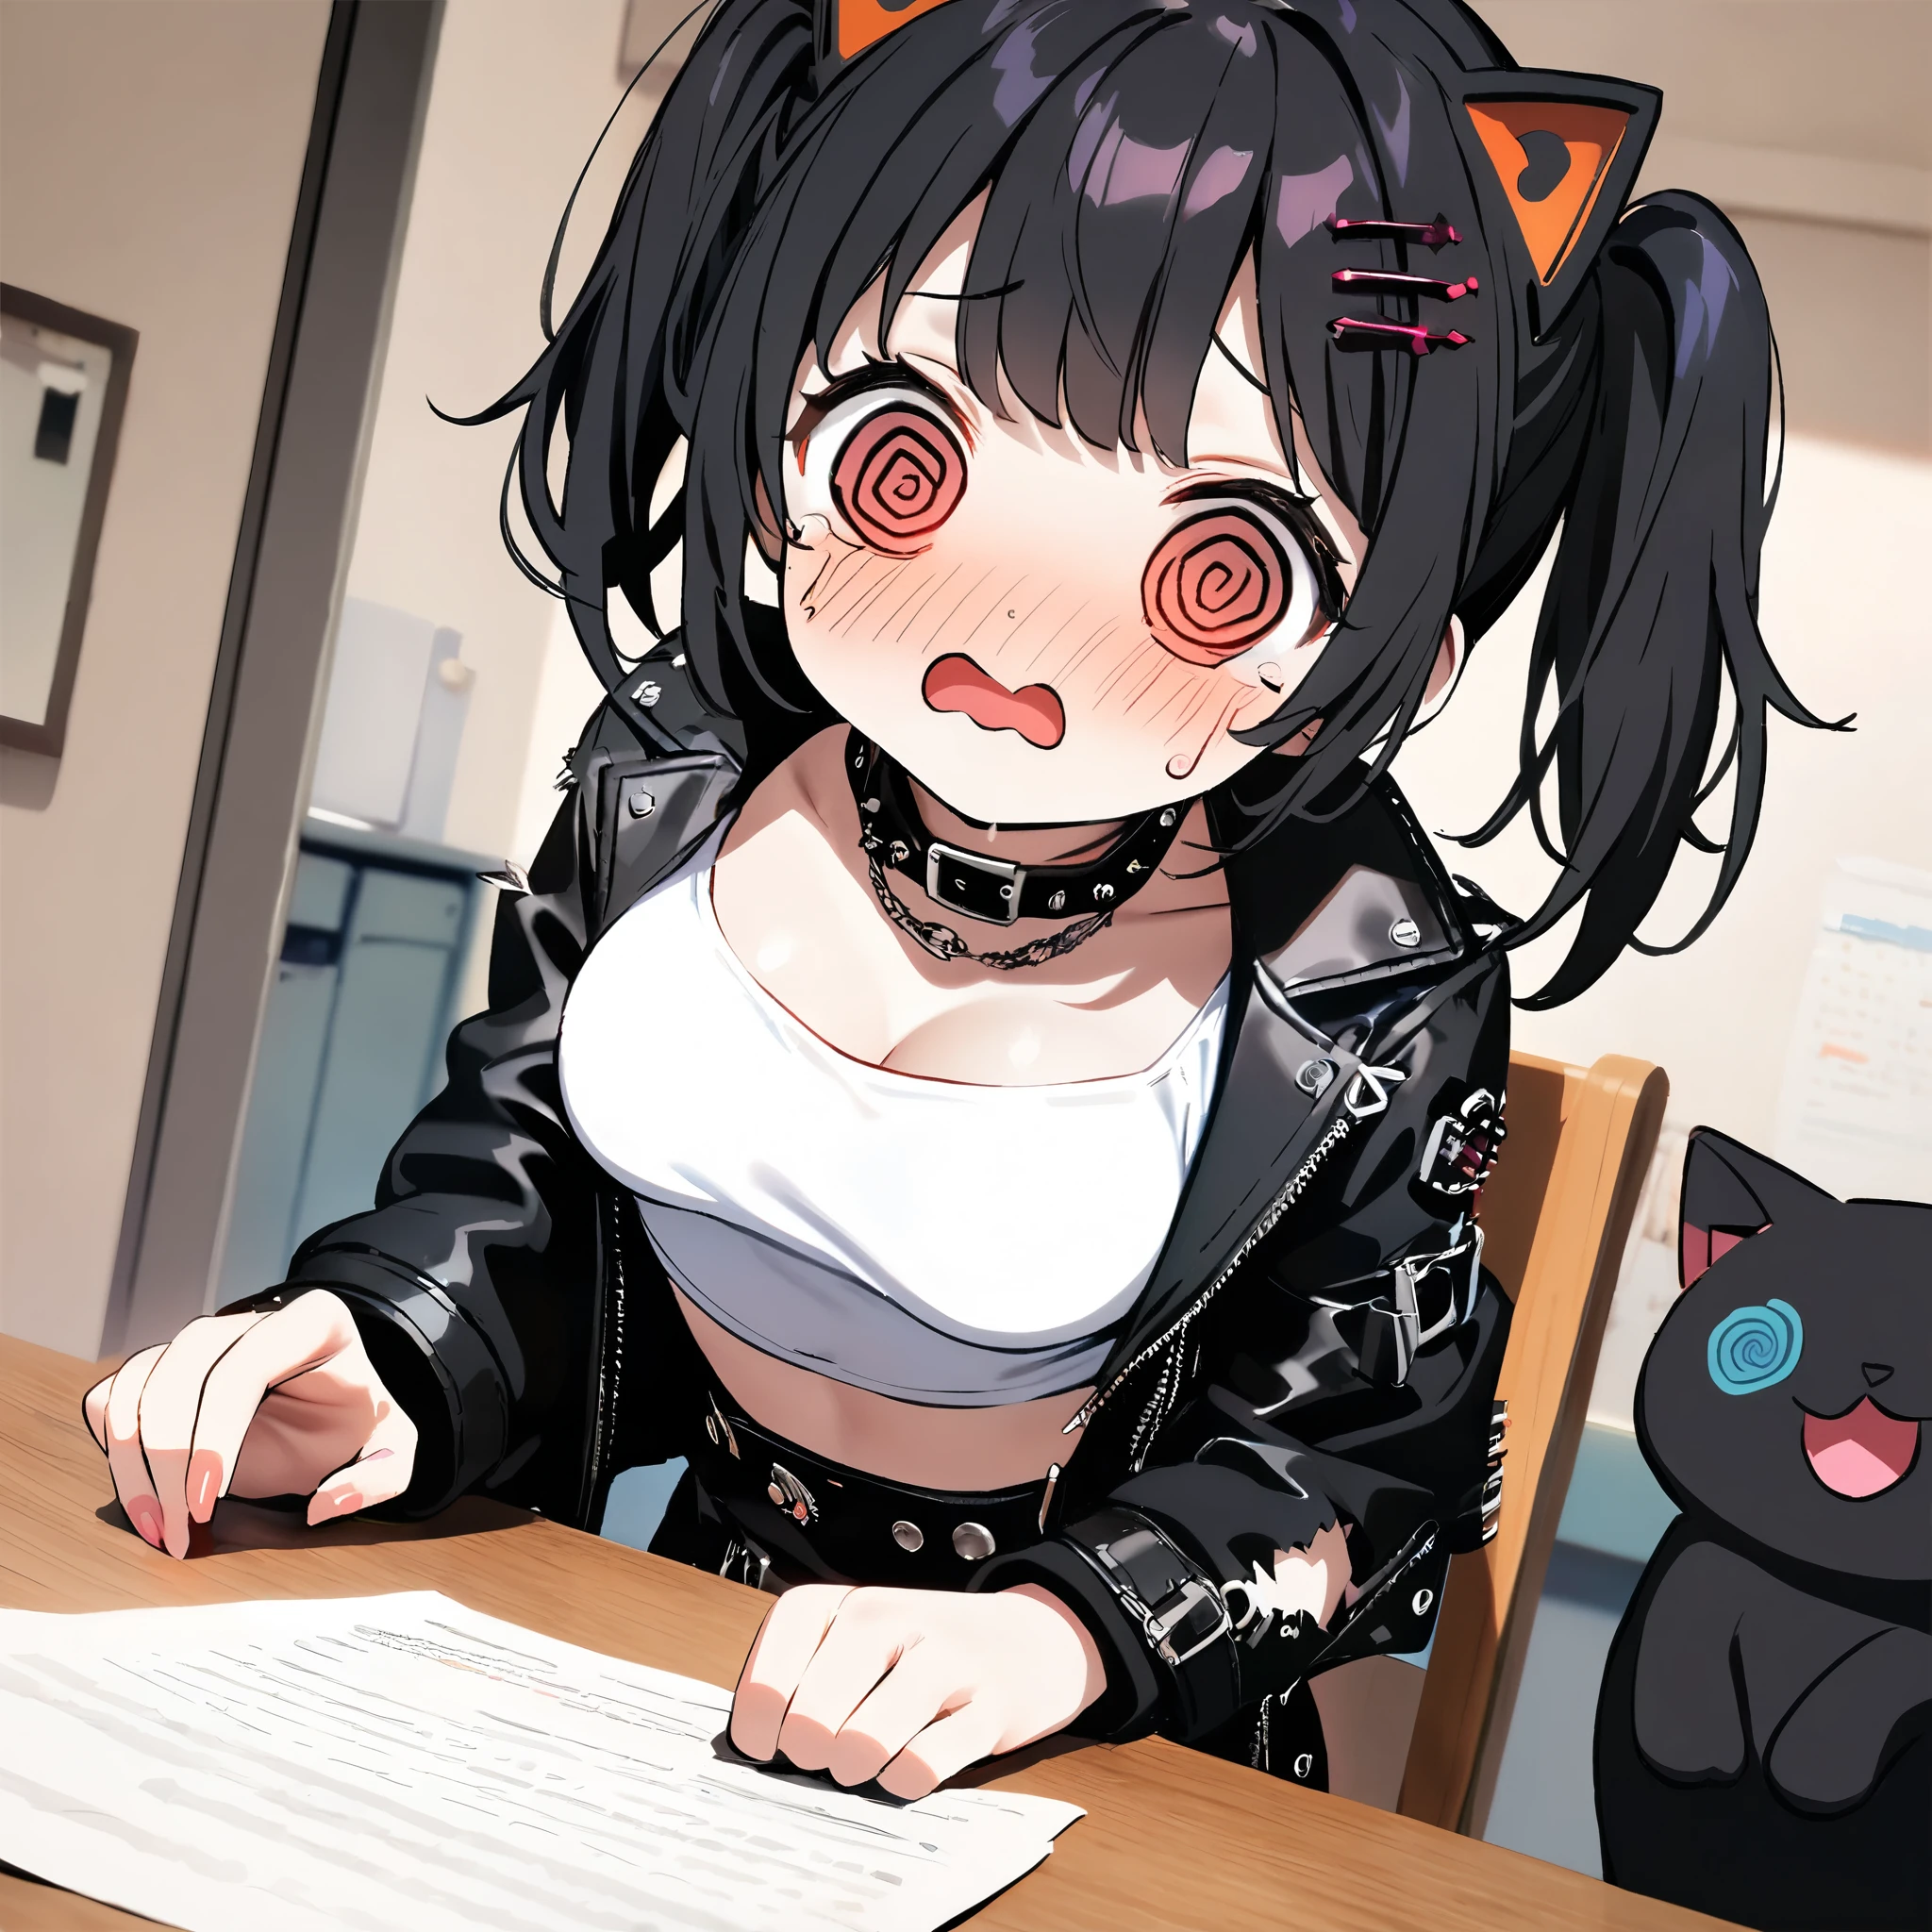 2d,female\(cute,kawaii,age of 12,crying,confused\((very small galaxy circling around head:0.5)\),floating hair,(black hair:1),(long twin tails hair),pale skin,skin color blue,red eyes,eyes shining,(big eyes),(ripped clothes:1.5),tight tube top,(breast:1.4),tight hot pants,(stomach shown:0.6),(punk fashion:1.4),(ripped black short jacket:1.4),fluffy black cat-ear,better hands,Perfect Hands,full body,(bright white @_@:1.8)\) is detention and taking a exam in the front of the mad teacher, BREAK ,at the college room,[chibi:1.4],[nsfw:2.0],quality\(8k,wallpaper of extremely detailed CG unit, ​masterpiece,hight resolution,top-quality,top-quality real texture skin,hyper realisitic,increase the resolution,RAW photos,best qualtiy,highly detailed,the wallpaper/),dynamic angle,[nsfw:0.8],cat ear,[nsfw]